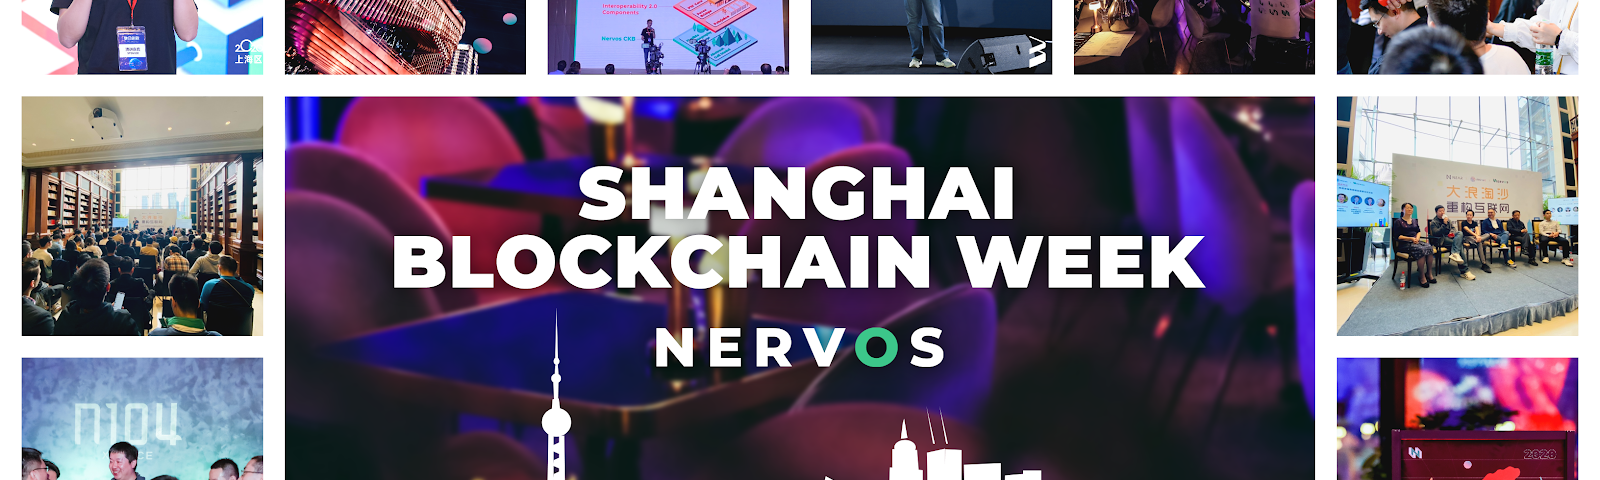 collage of pictures from Shanghai Blockchain Week with Nervos logo